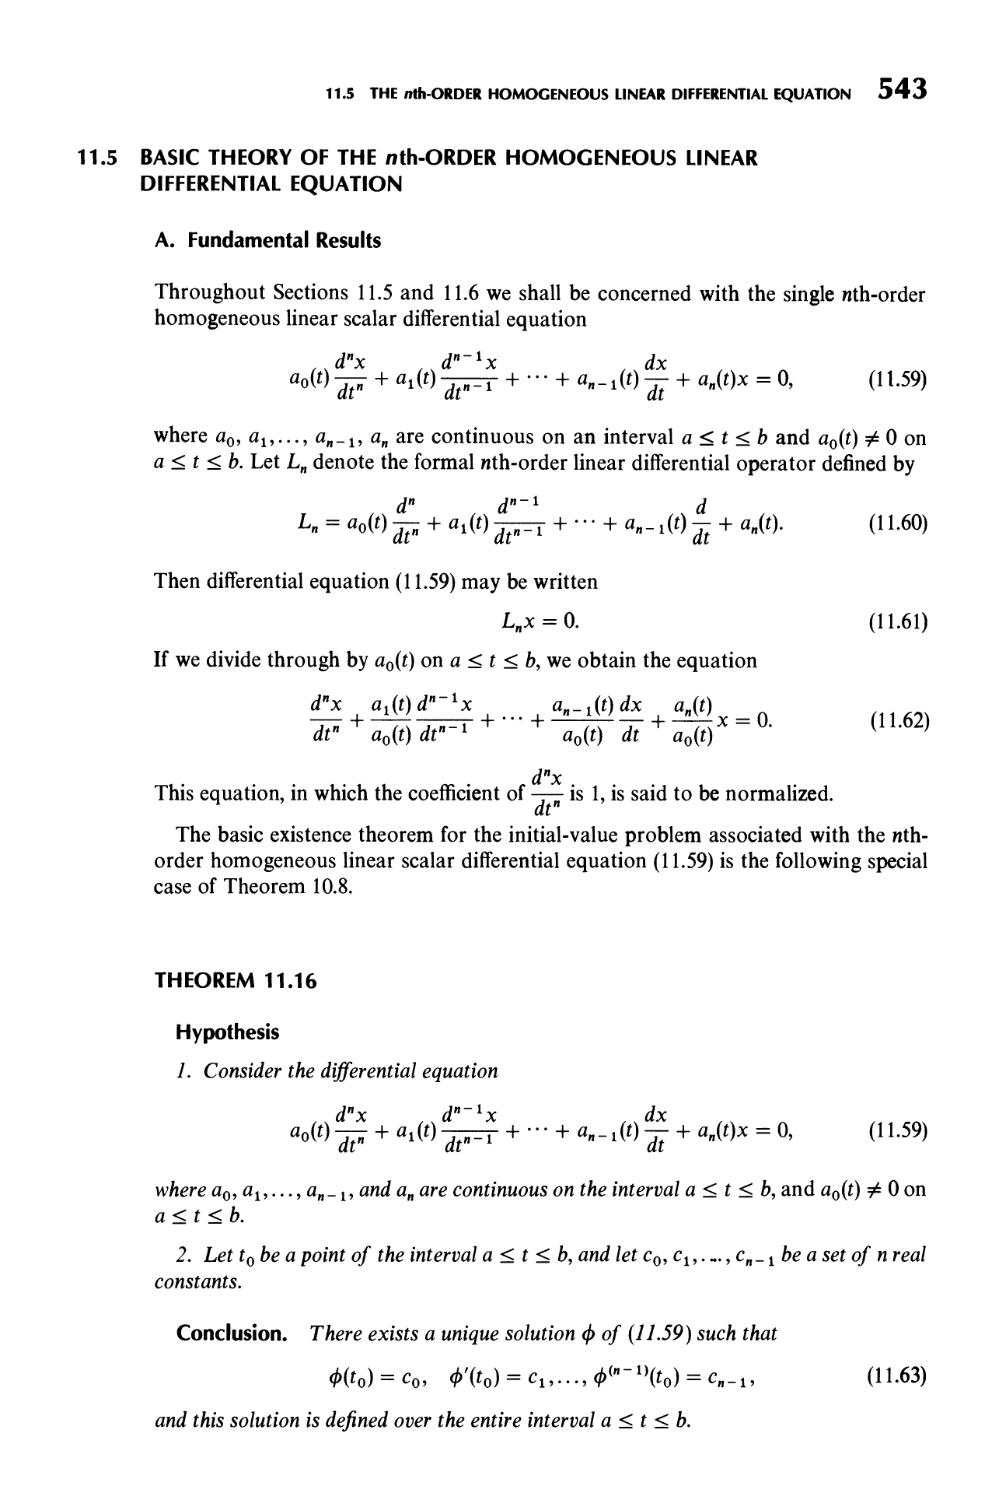 11.5  Basic Theory of the nth-Order Homogeneous Linear Differential Equation